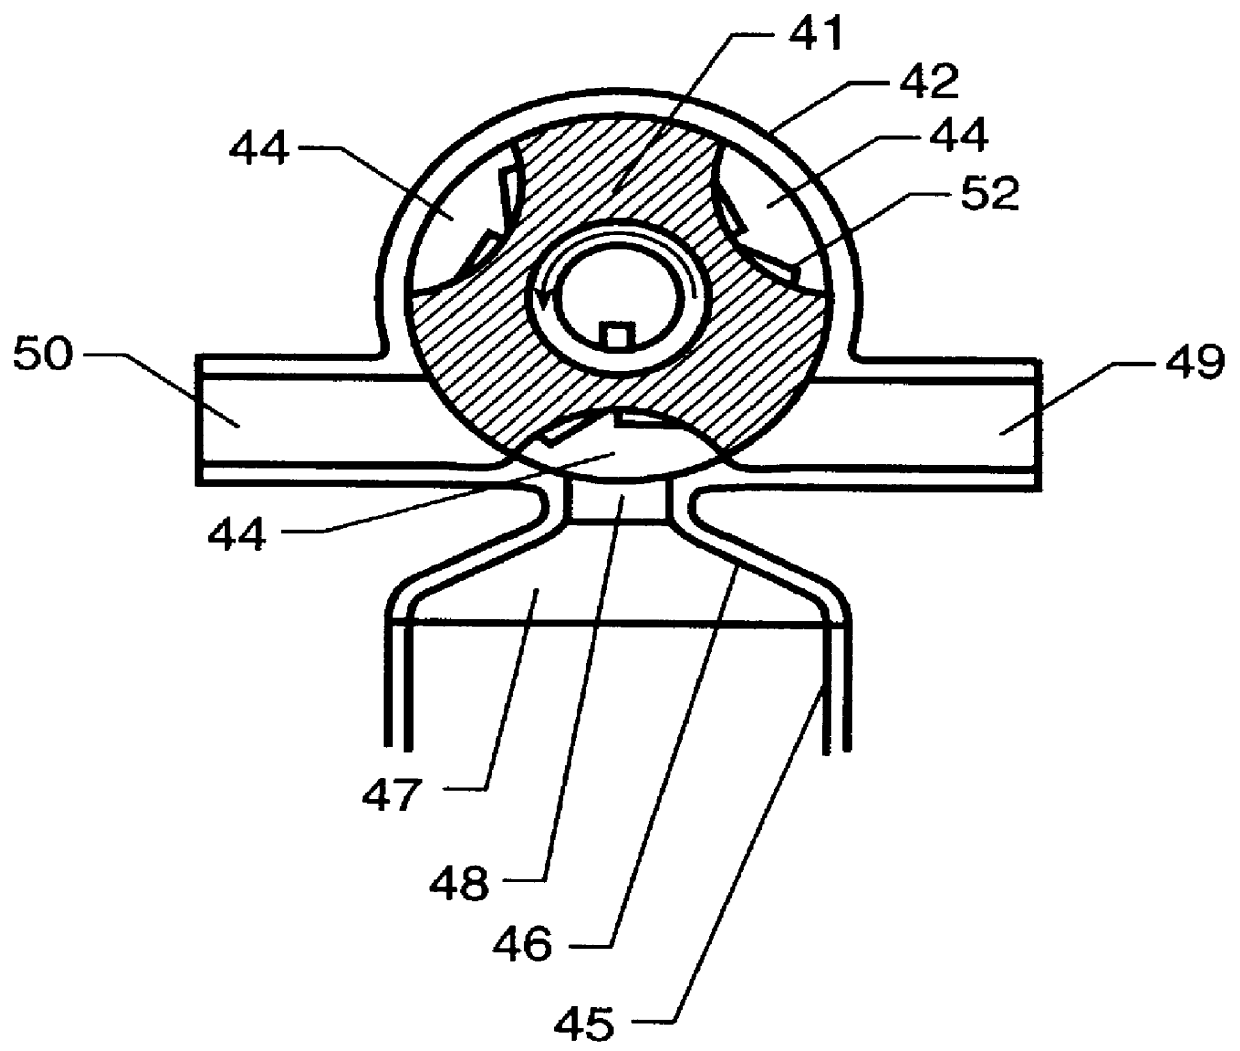 Carbon fiber reinforced carbon composite rotary valve for an internal combustion engine